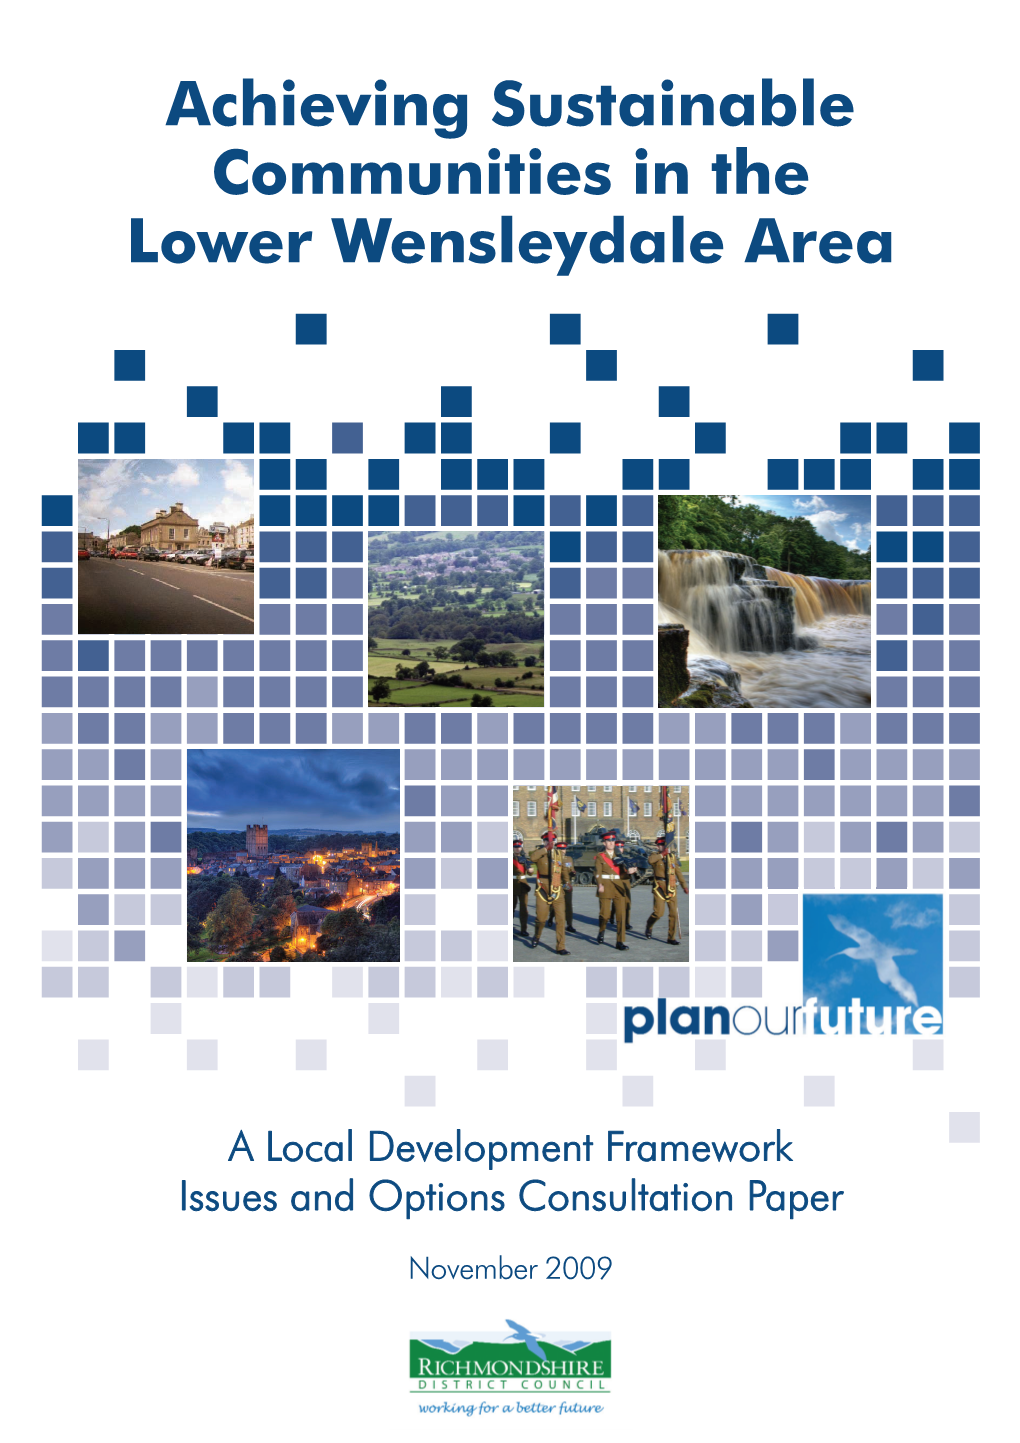 Achieving Sustainable Communities in the Lower Wensleydale Area